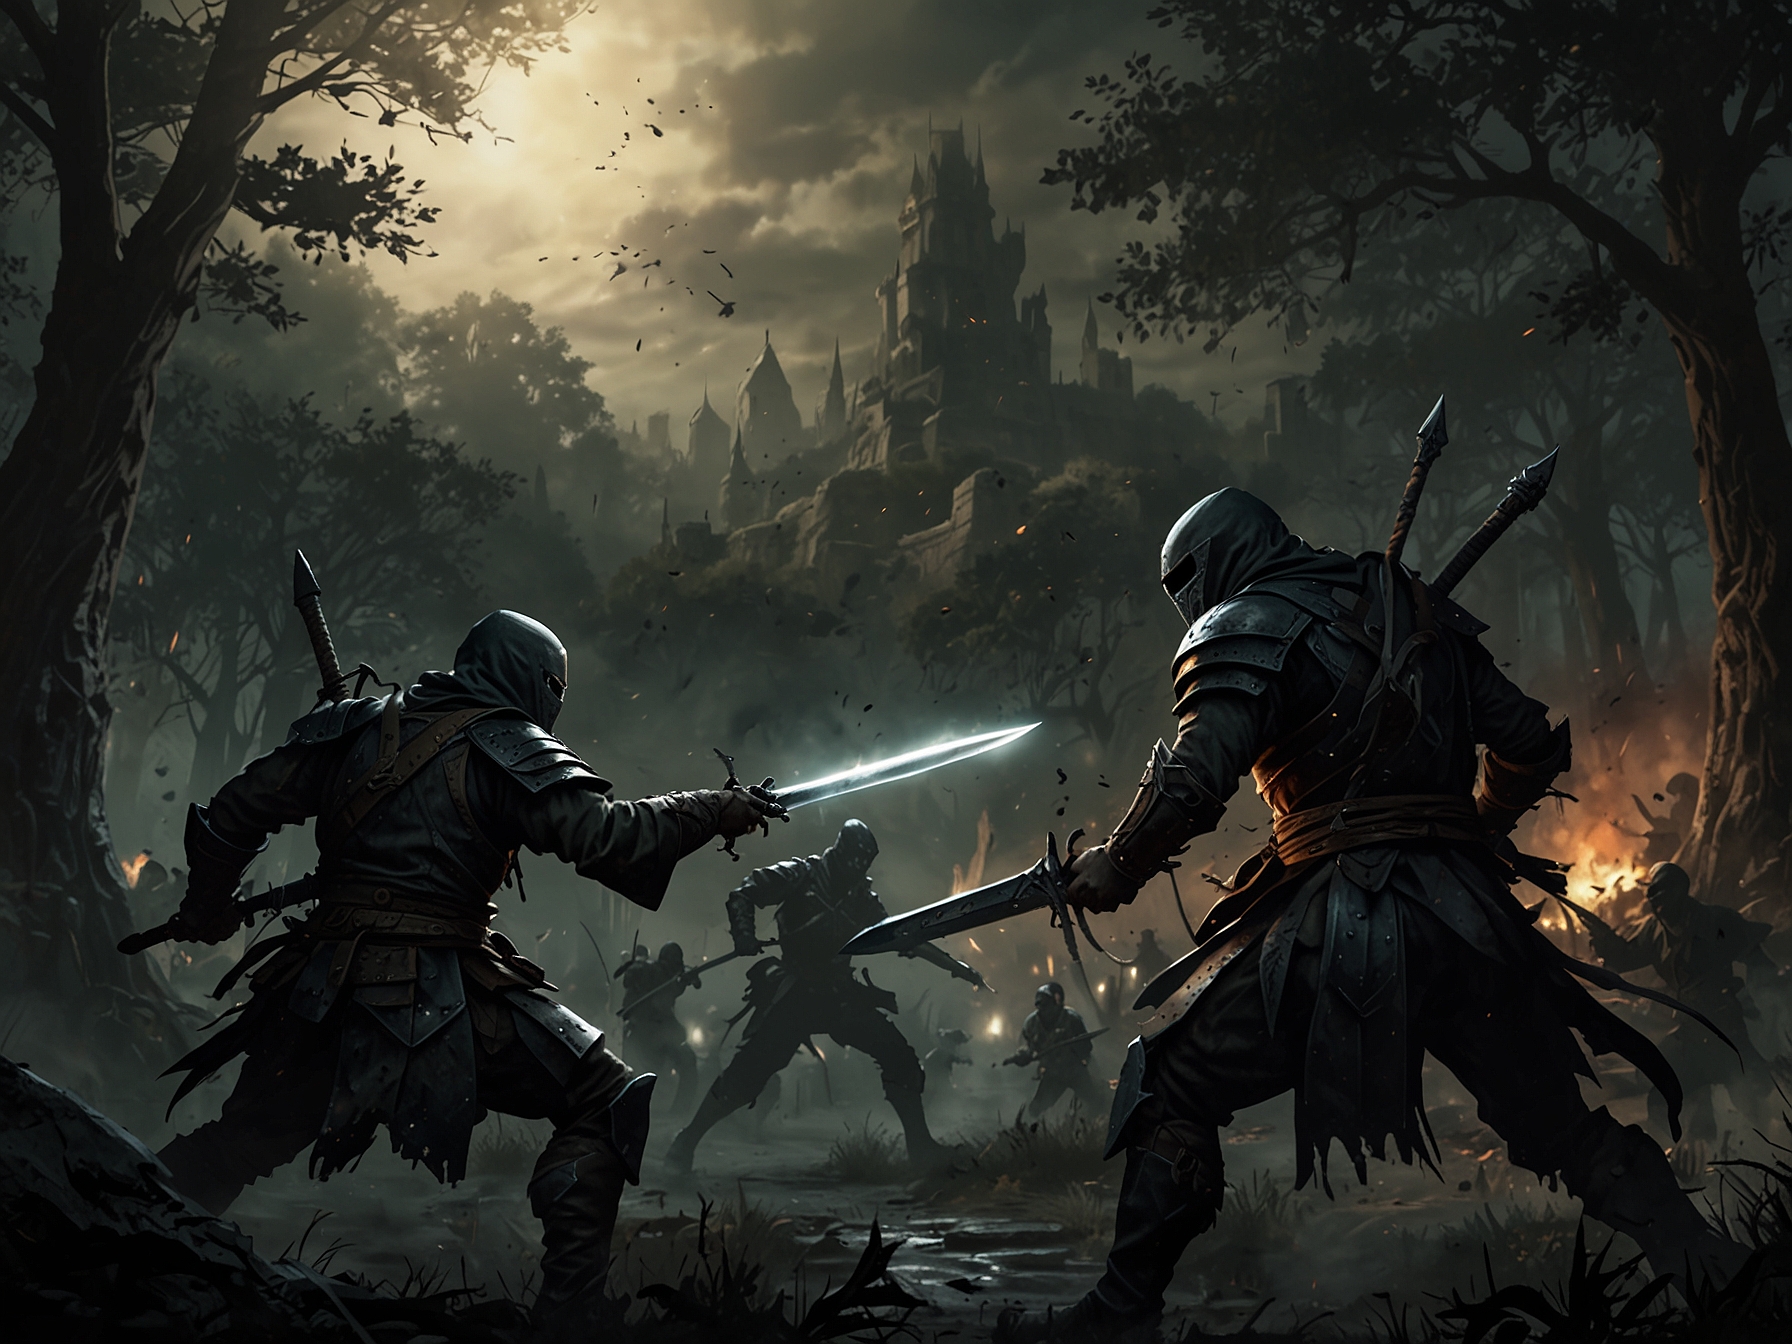 A scene depicting a dynamic combat encounter with new enemies in 'Shadow of the Erdtree,' highlighting the refined combat system and challenging gameplay emblematic of FromSoftware titles.